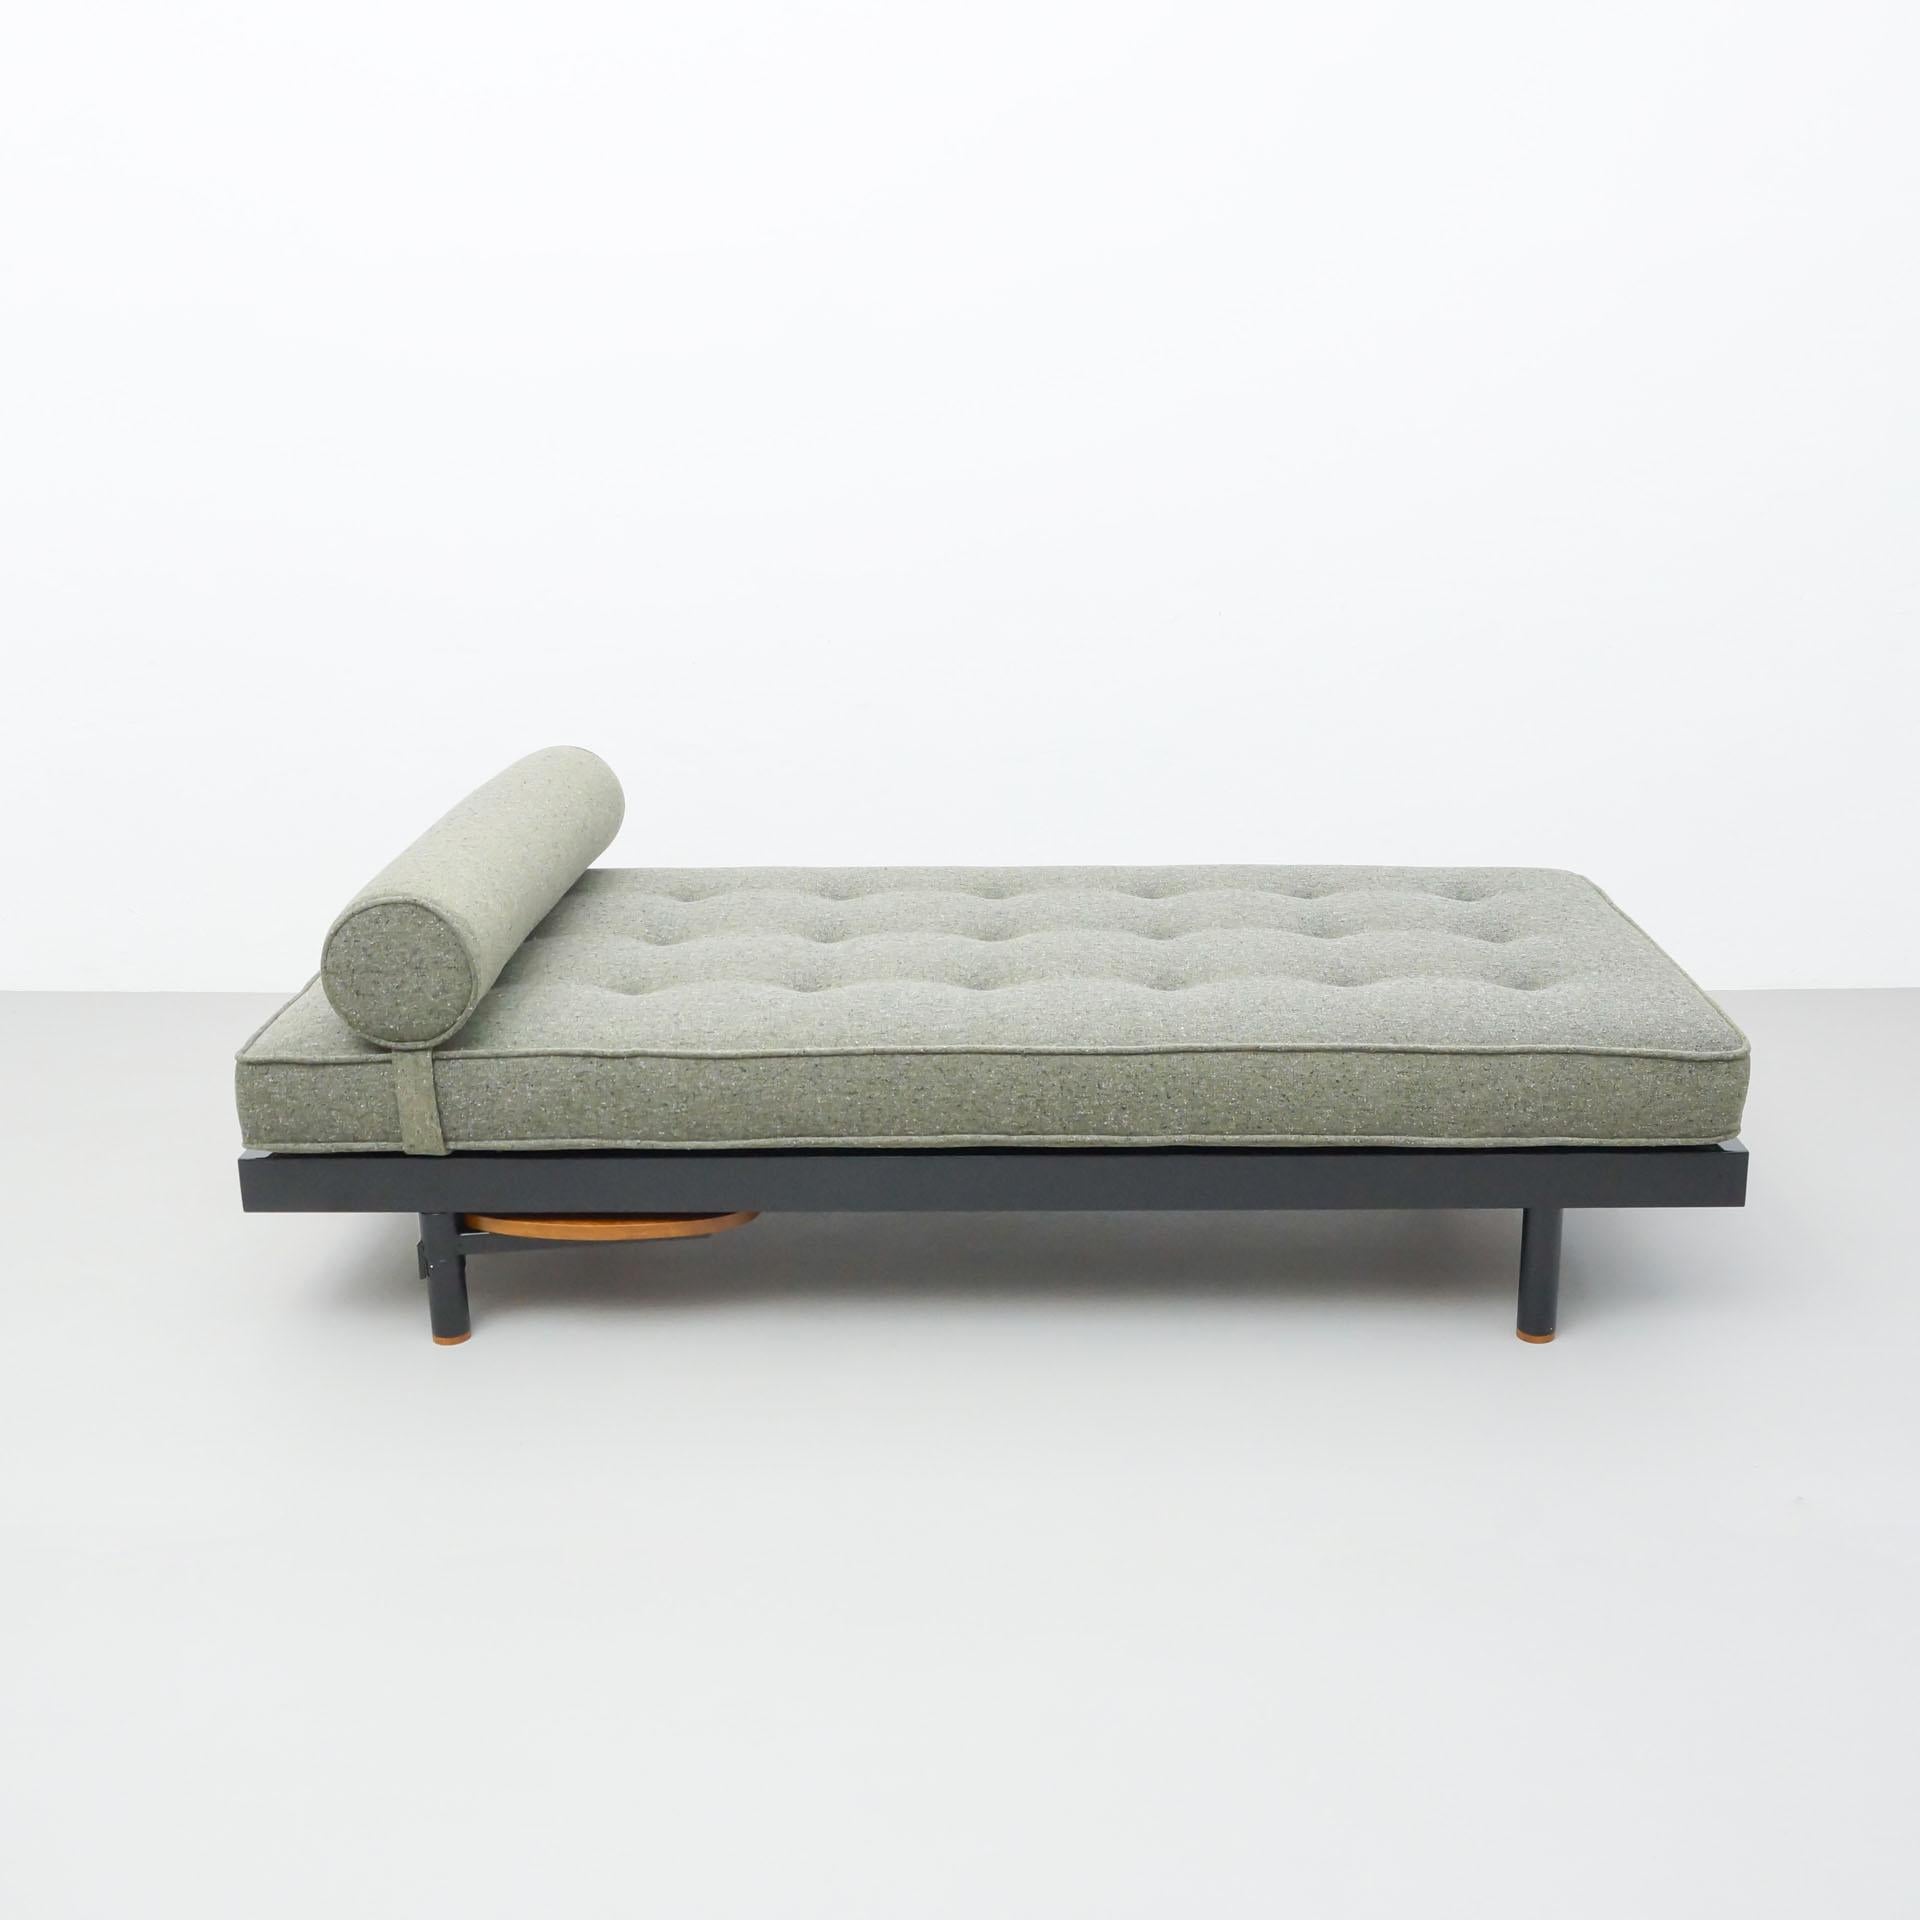 French Jean Prouve Mid-Century Modern S.C.A.L. Daybed, circa 1950